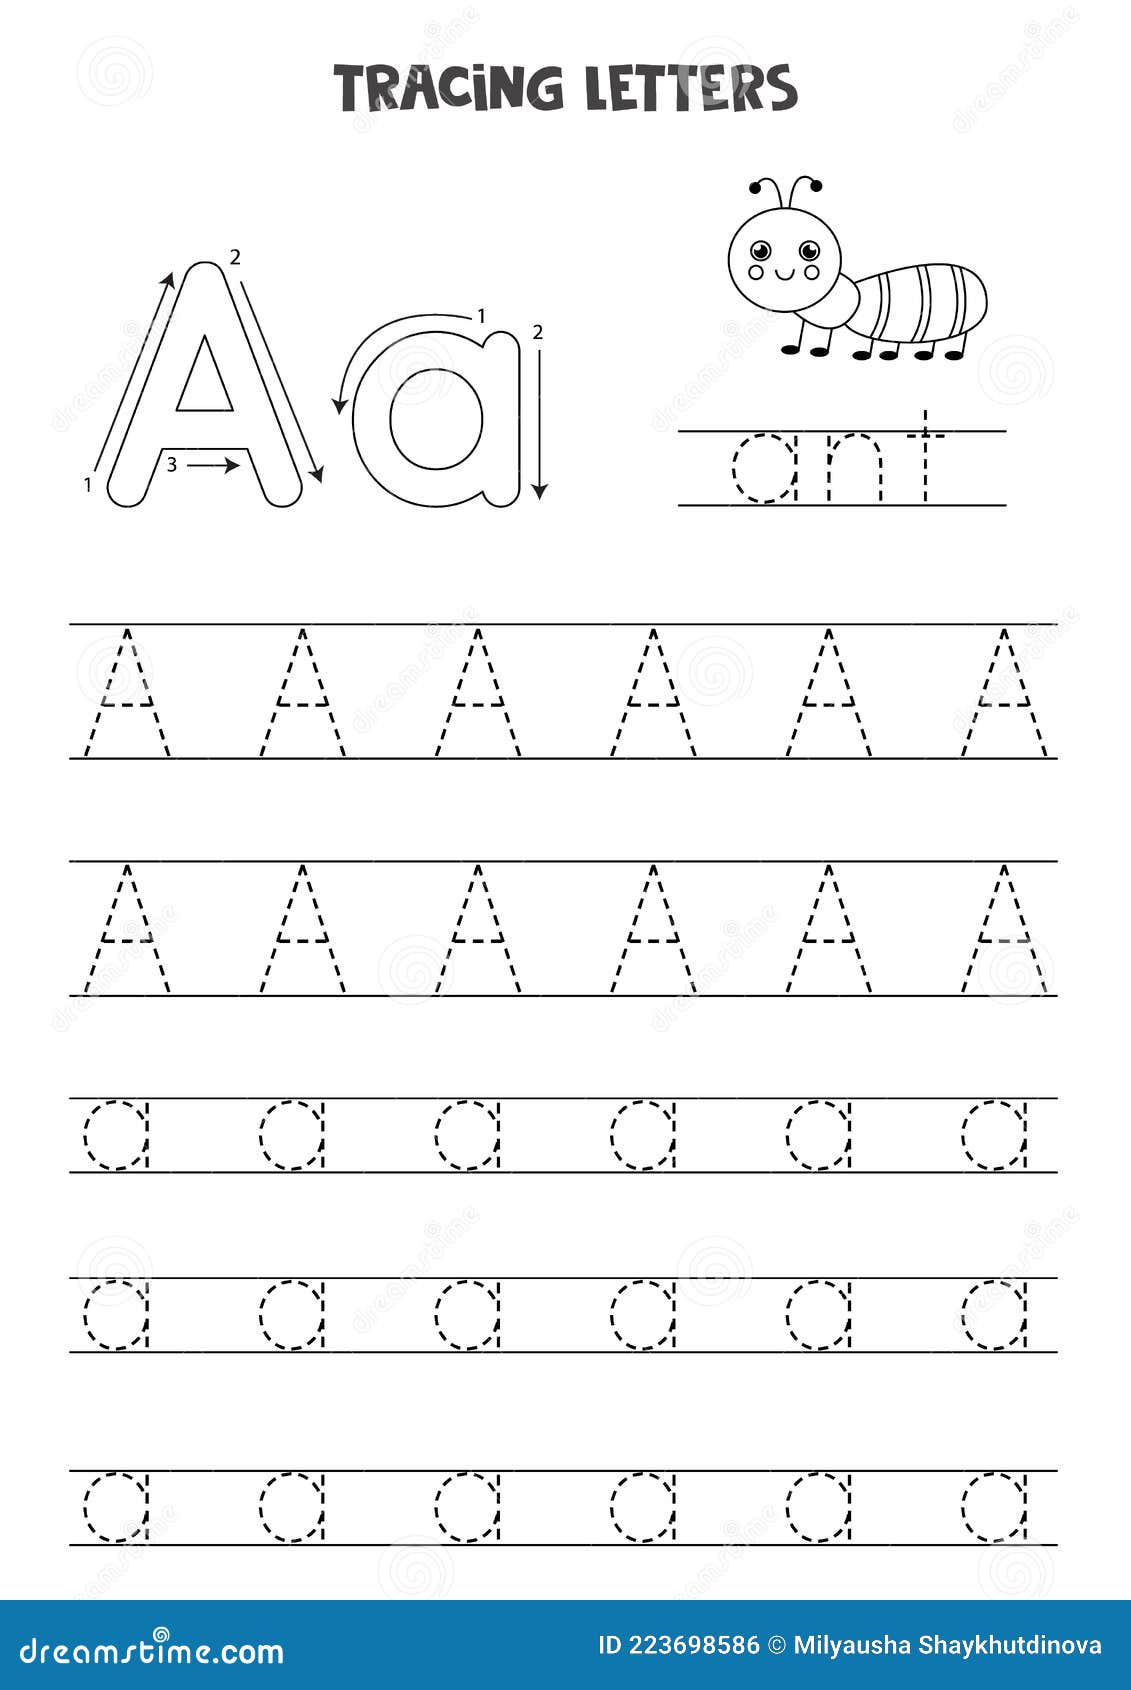 tracing-letters-of-english-alphabet-black-and-white-worksheet-stock